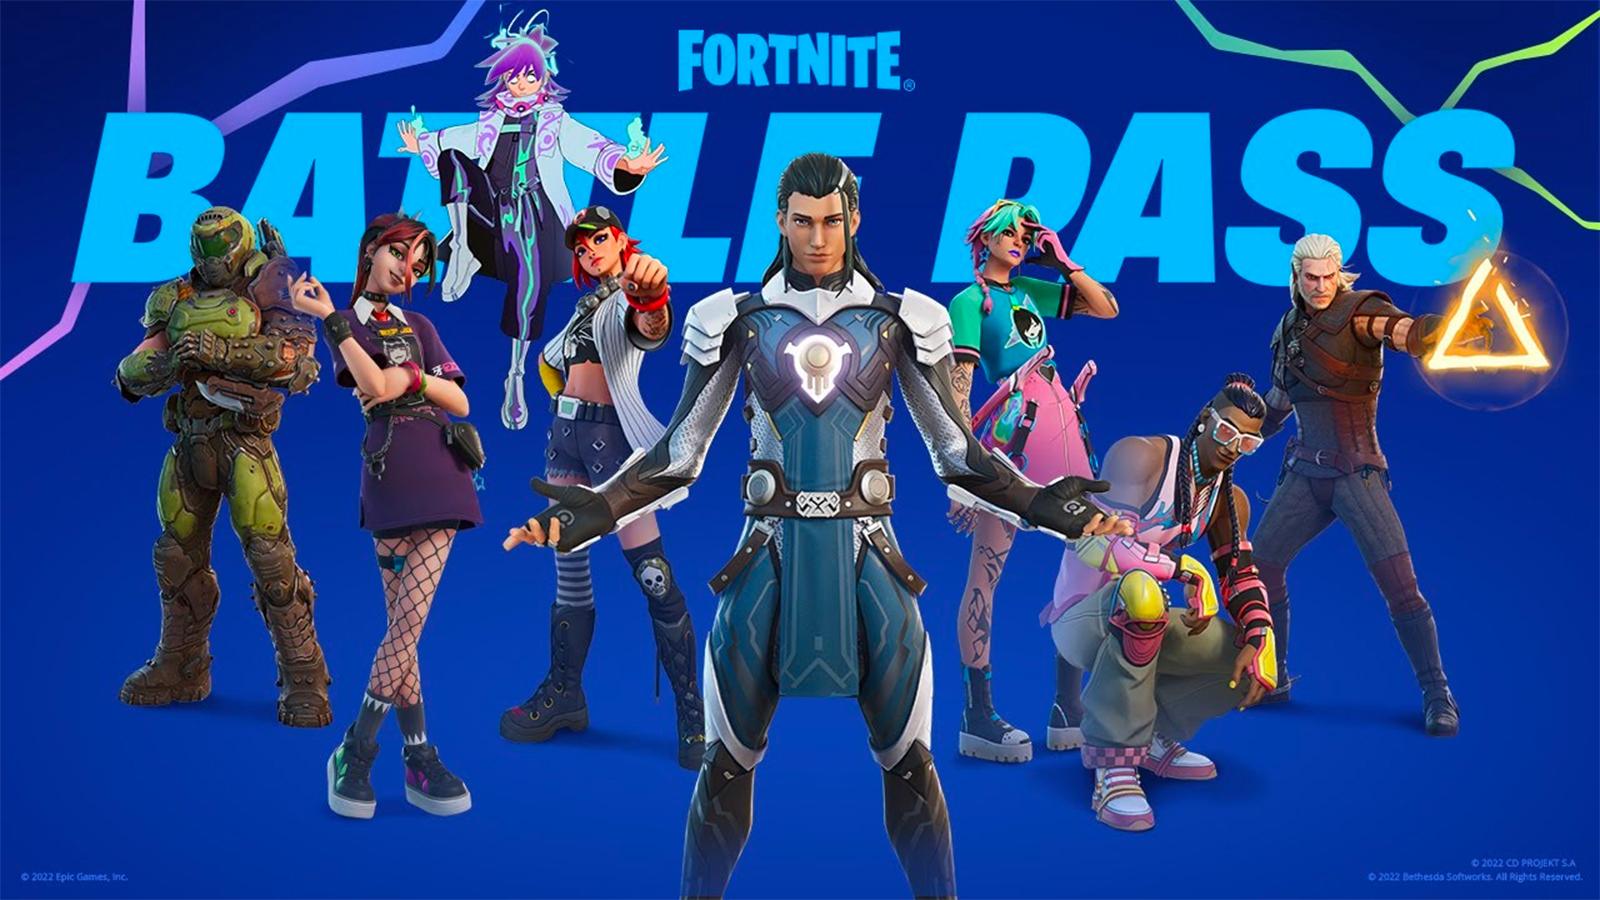 How to get free Fortnite skins in December 2023 - Dexerto